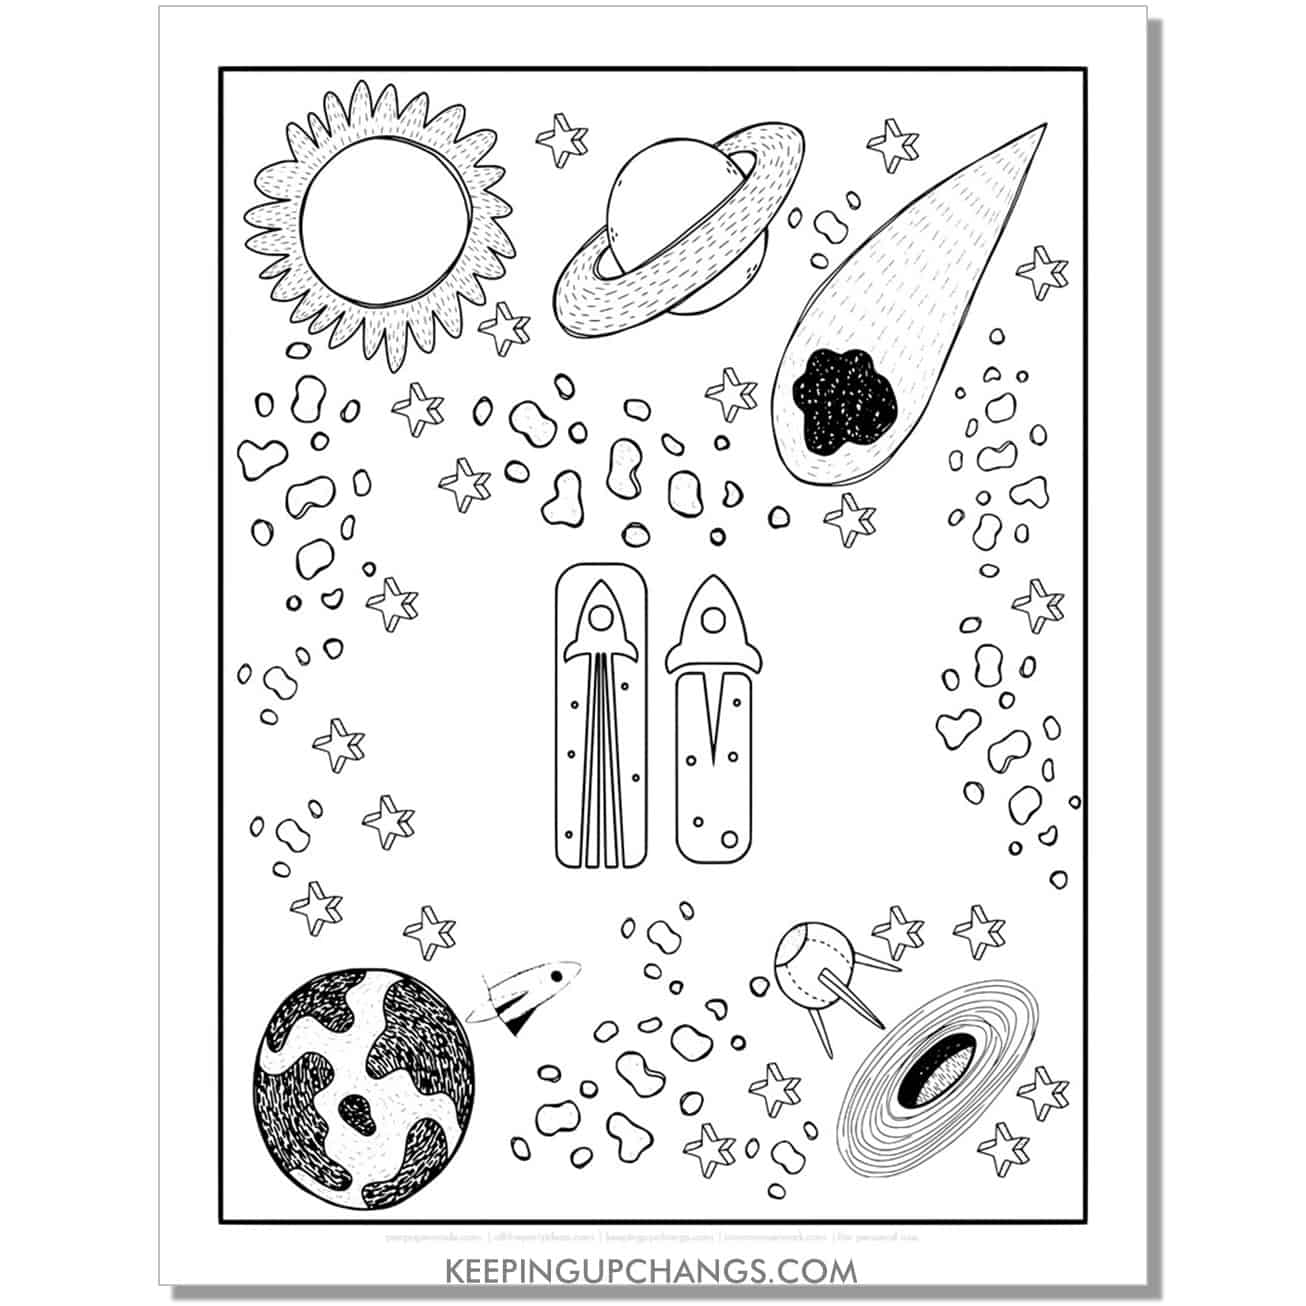 free alphabet letter i coloring page for kids with rockets, space theme.